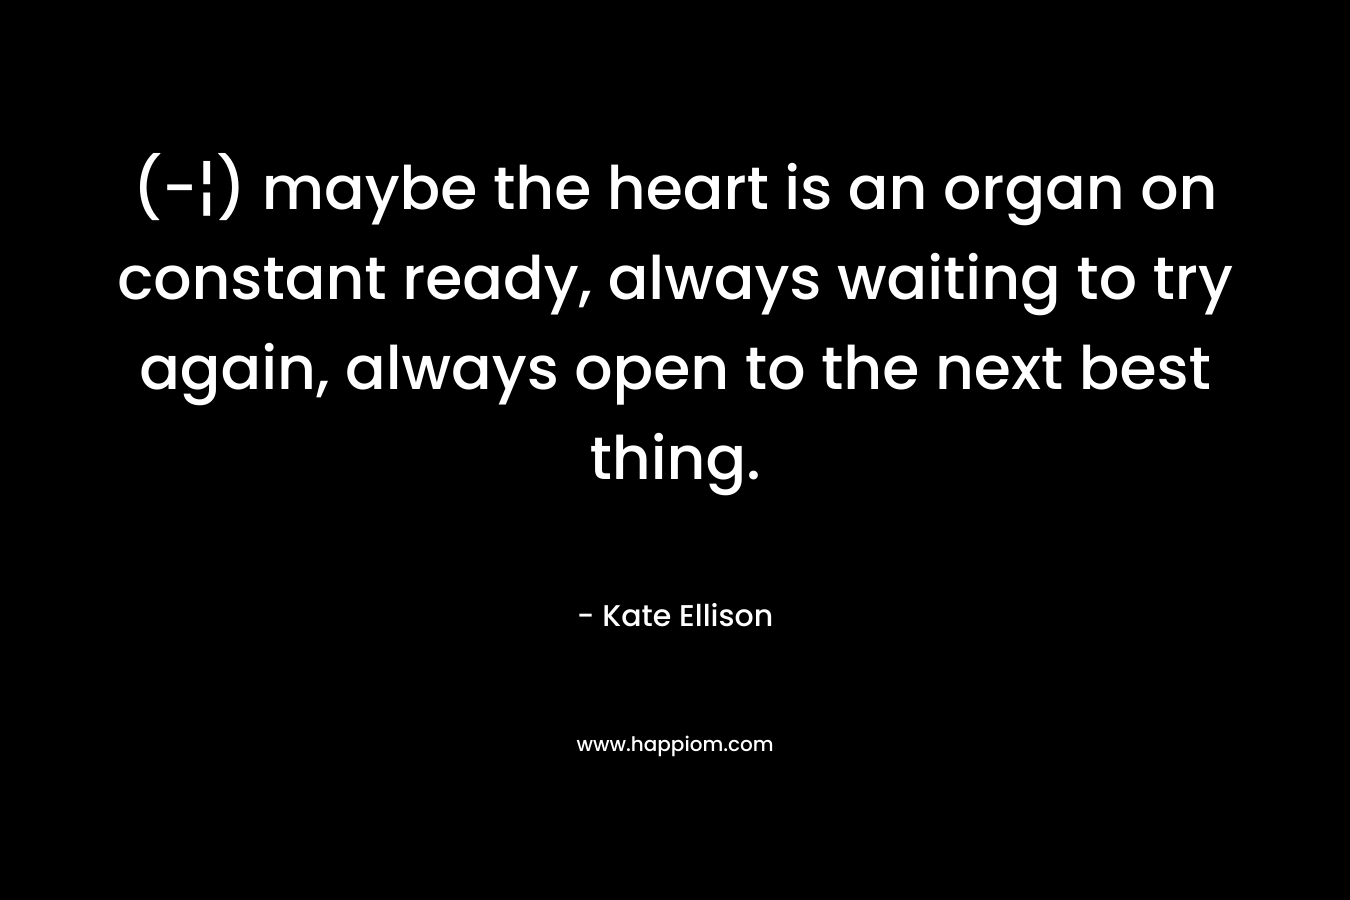 (-¦) maybe the heart is an organ on constant ready, always waiting to try again, always open to the next best thing.